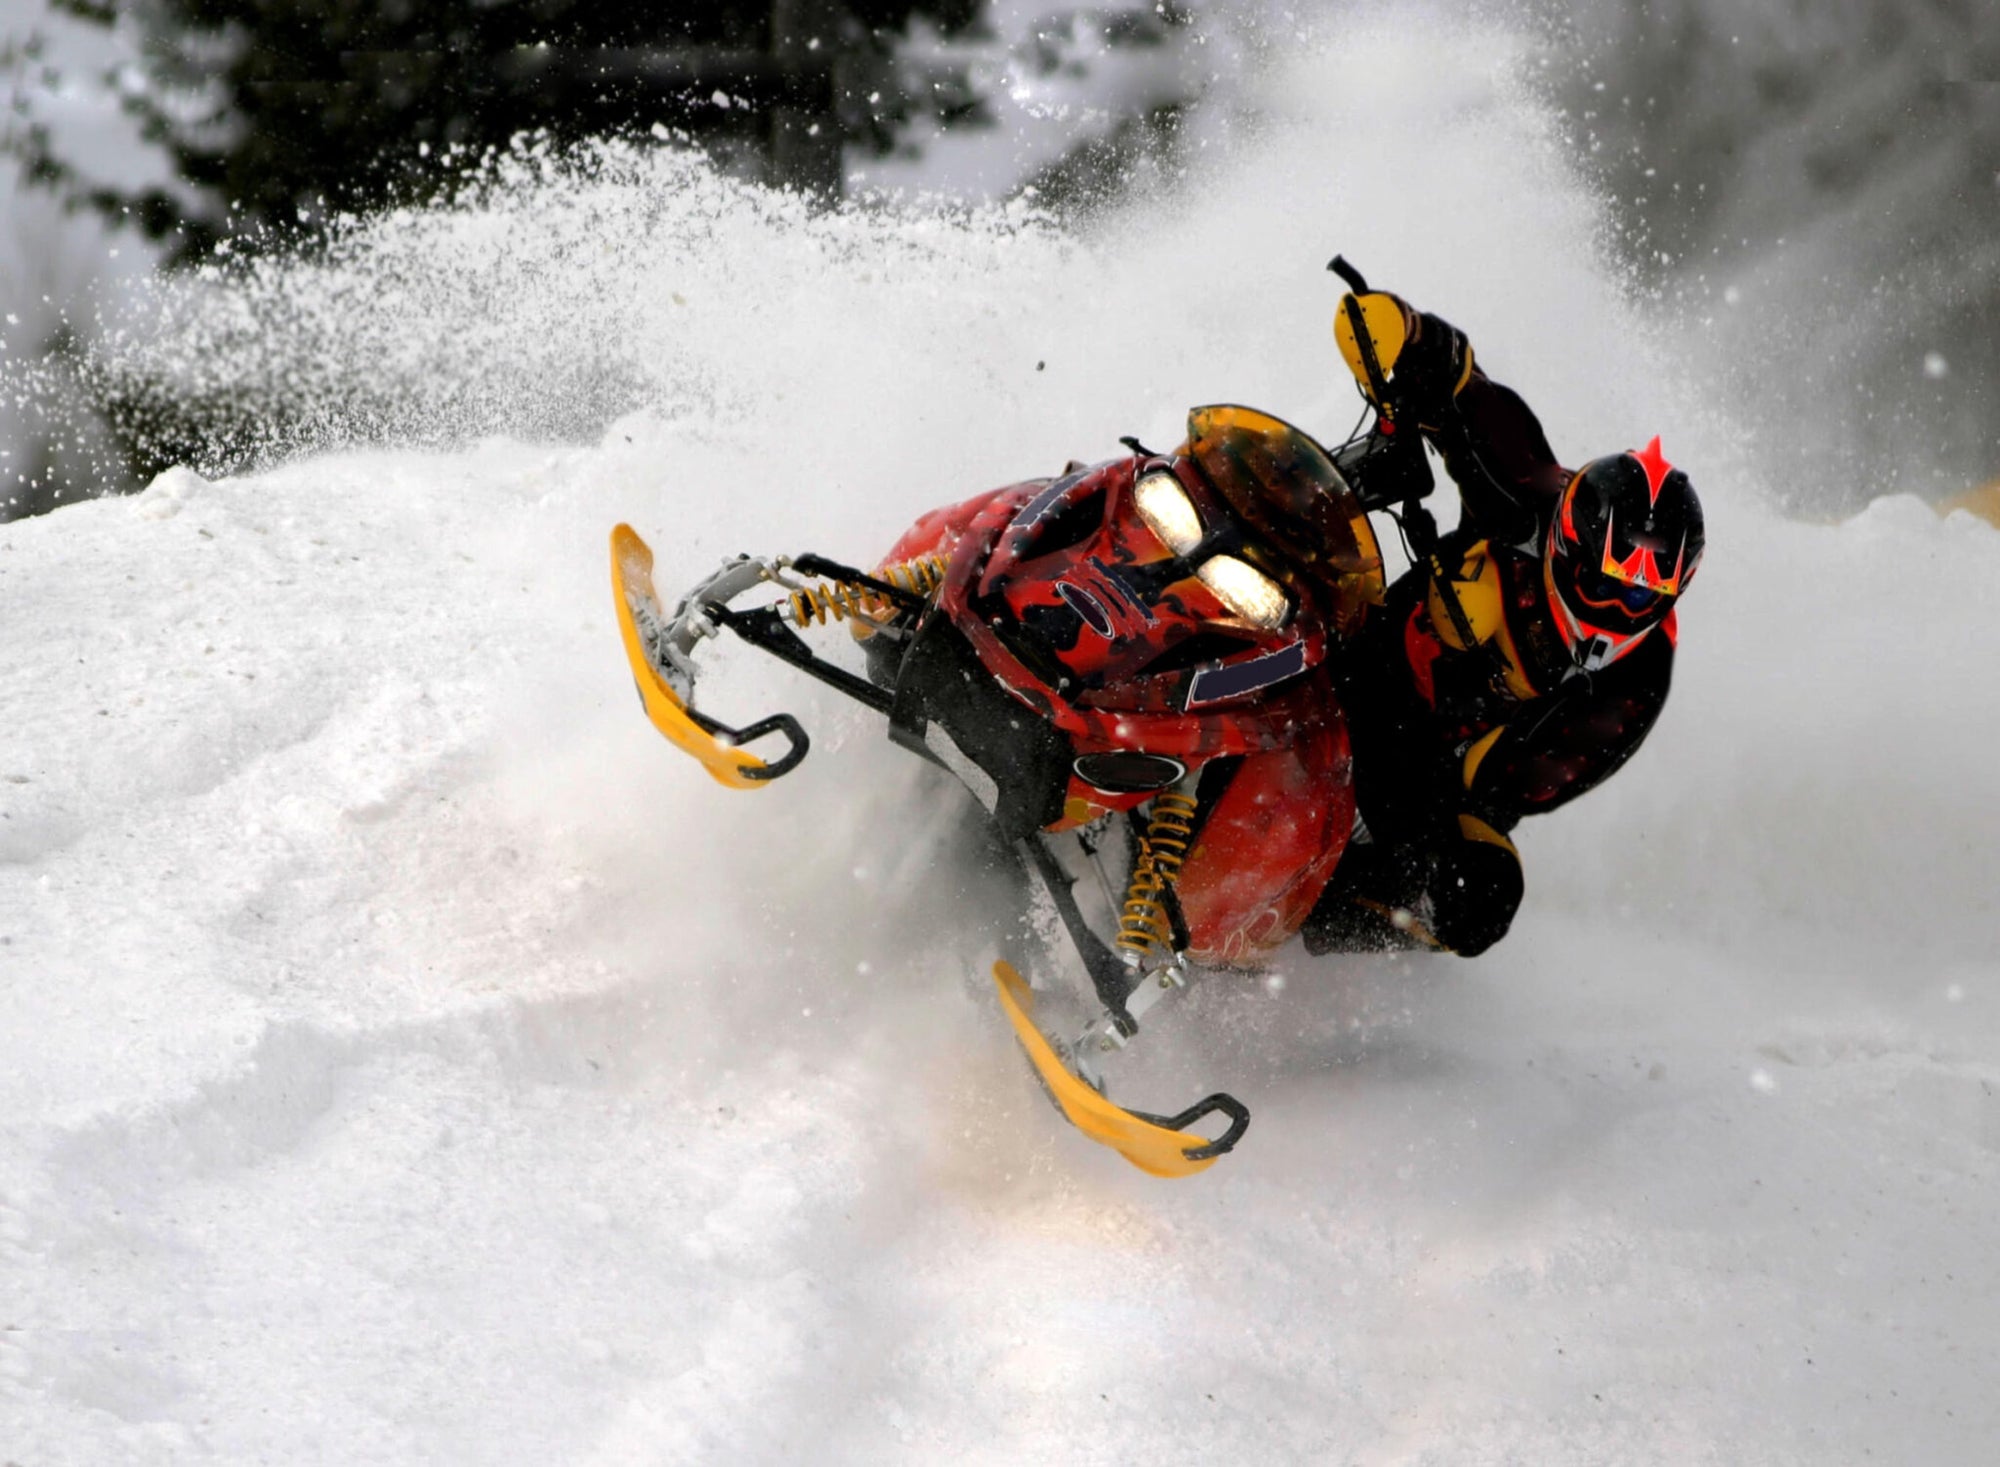 Things to Keep in Mind While Snowmobiling